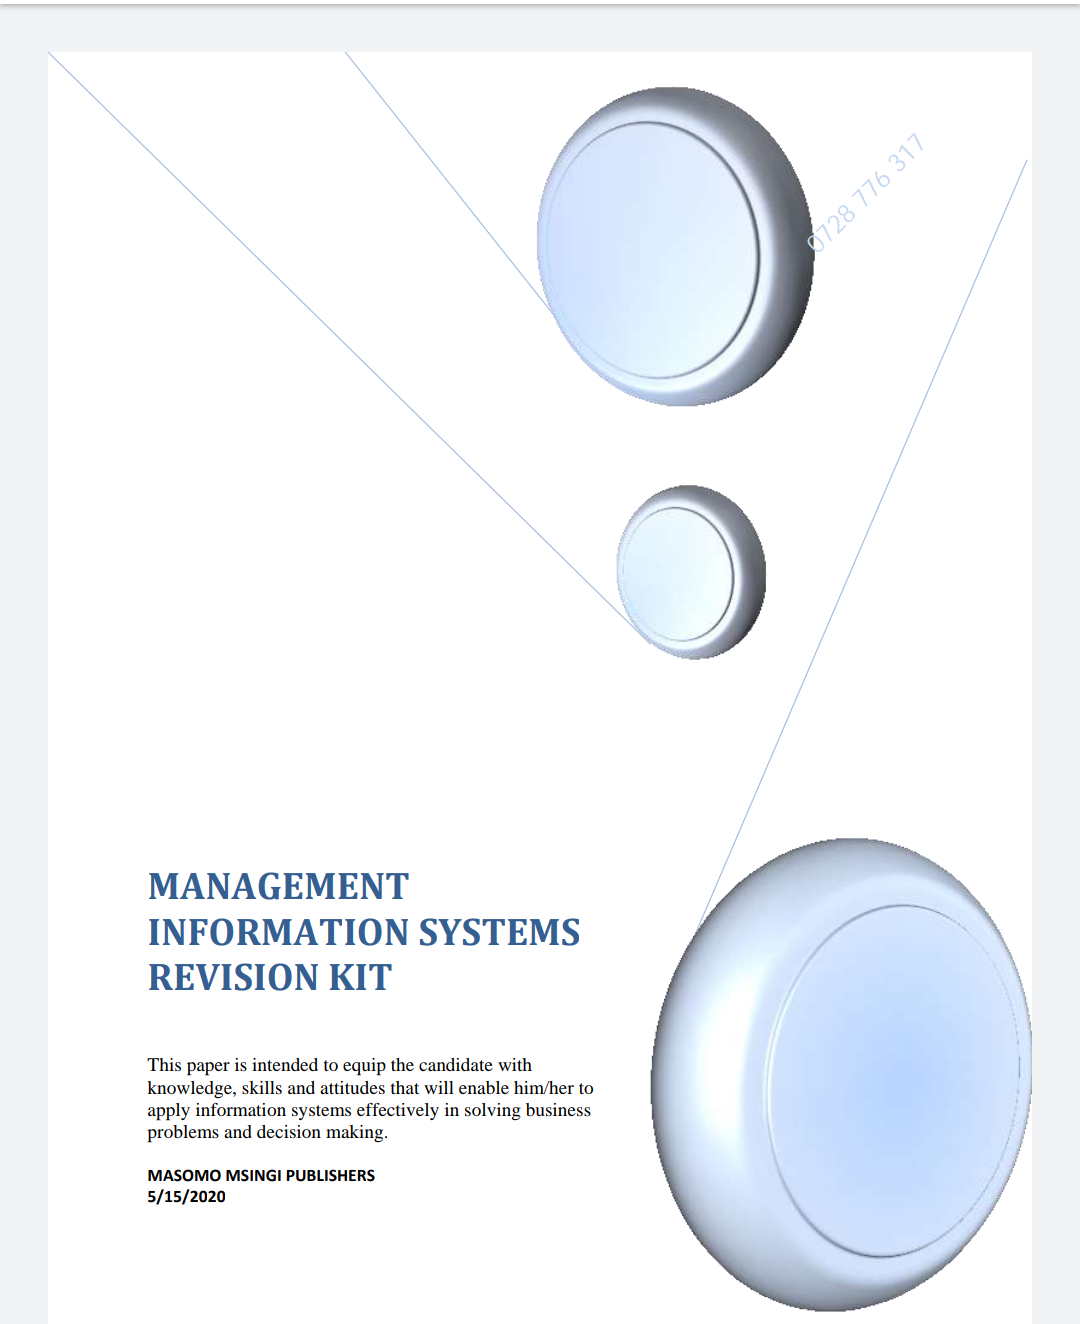 MANAGEMENT INFORMATION SYSTEMS QUESTION AND ANSWER